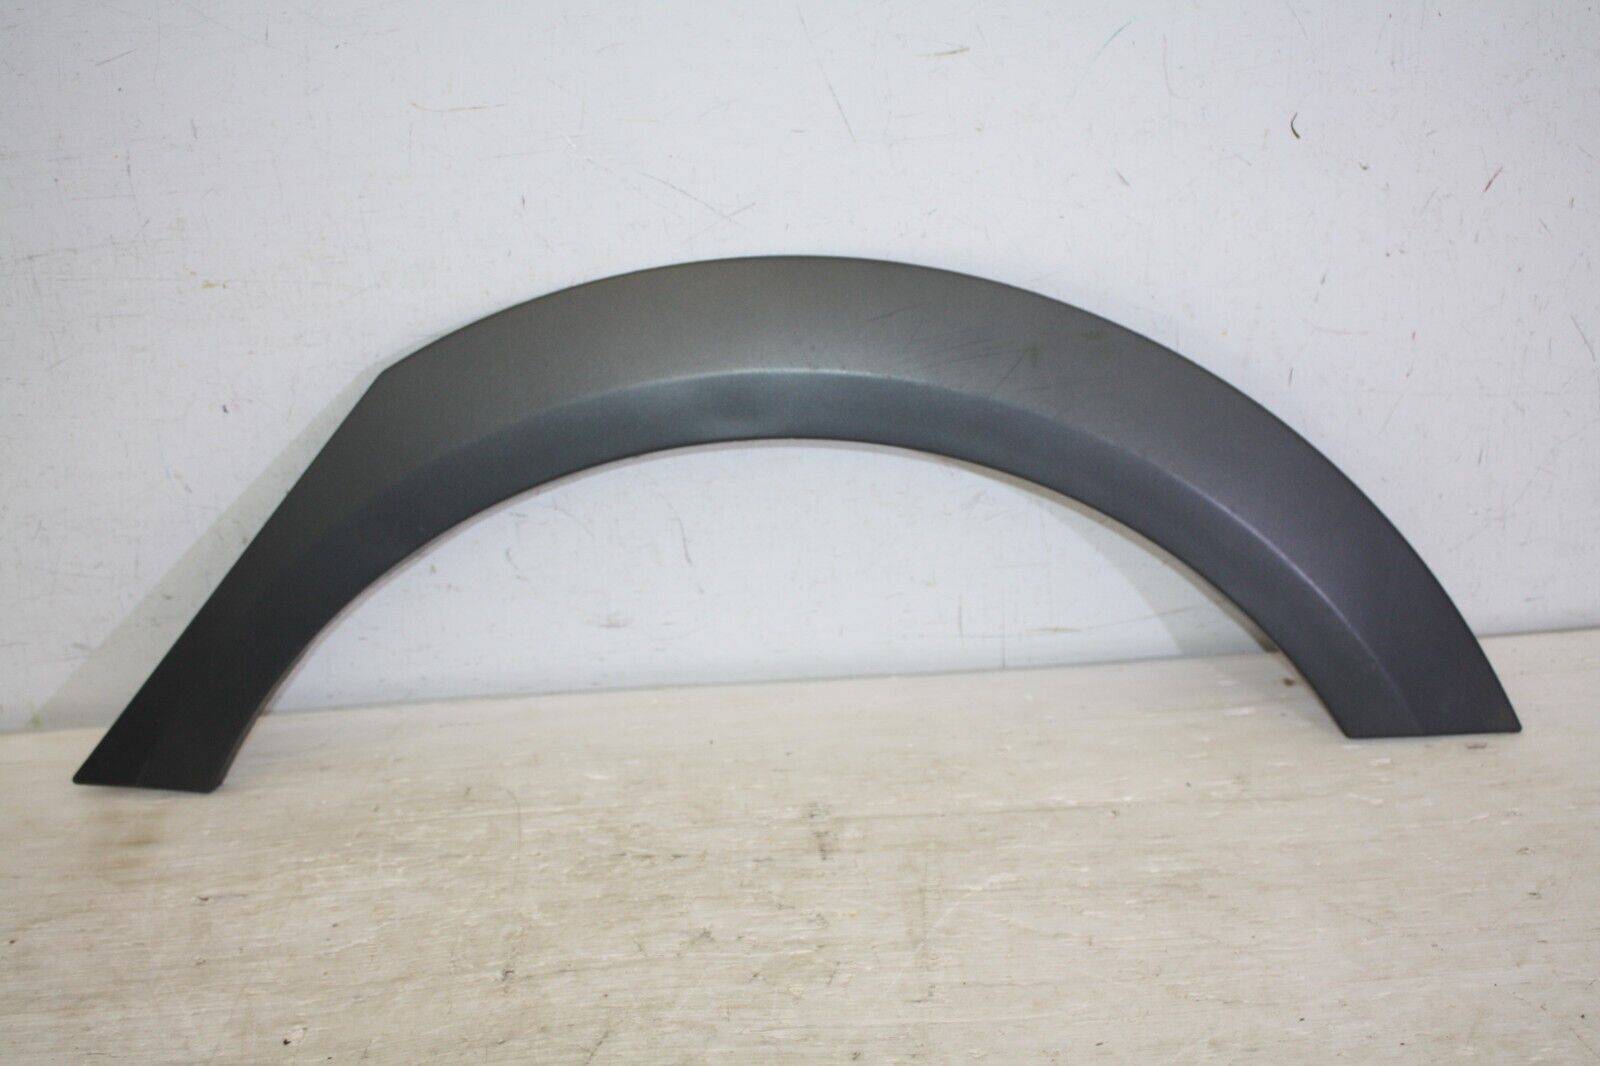 Audi A6 Allroad Rear Left Wheel Arch 2011 TO 2014 4G9853817 Genuine 176173960682